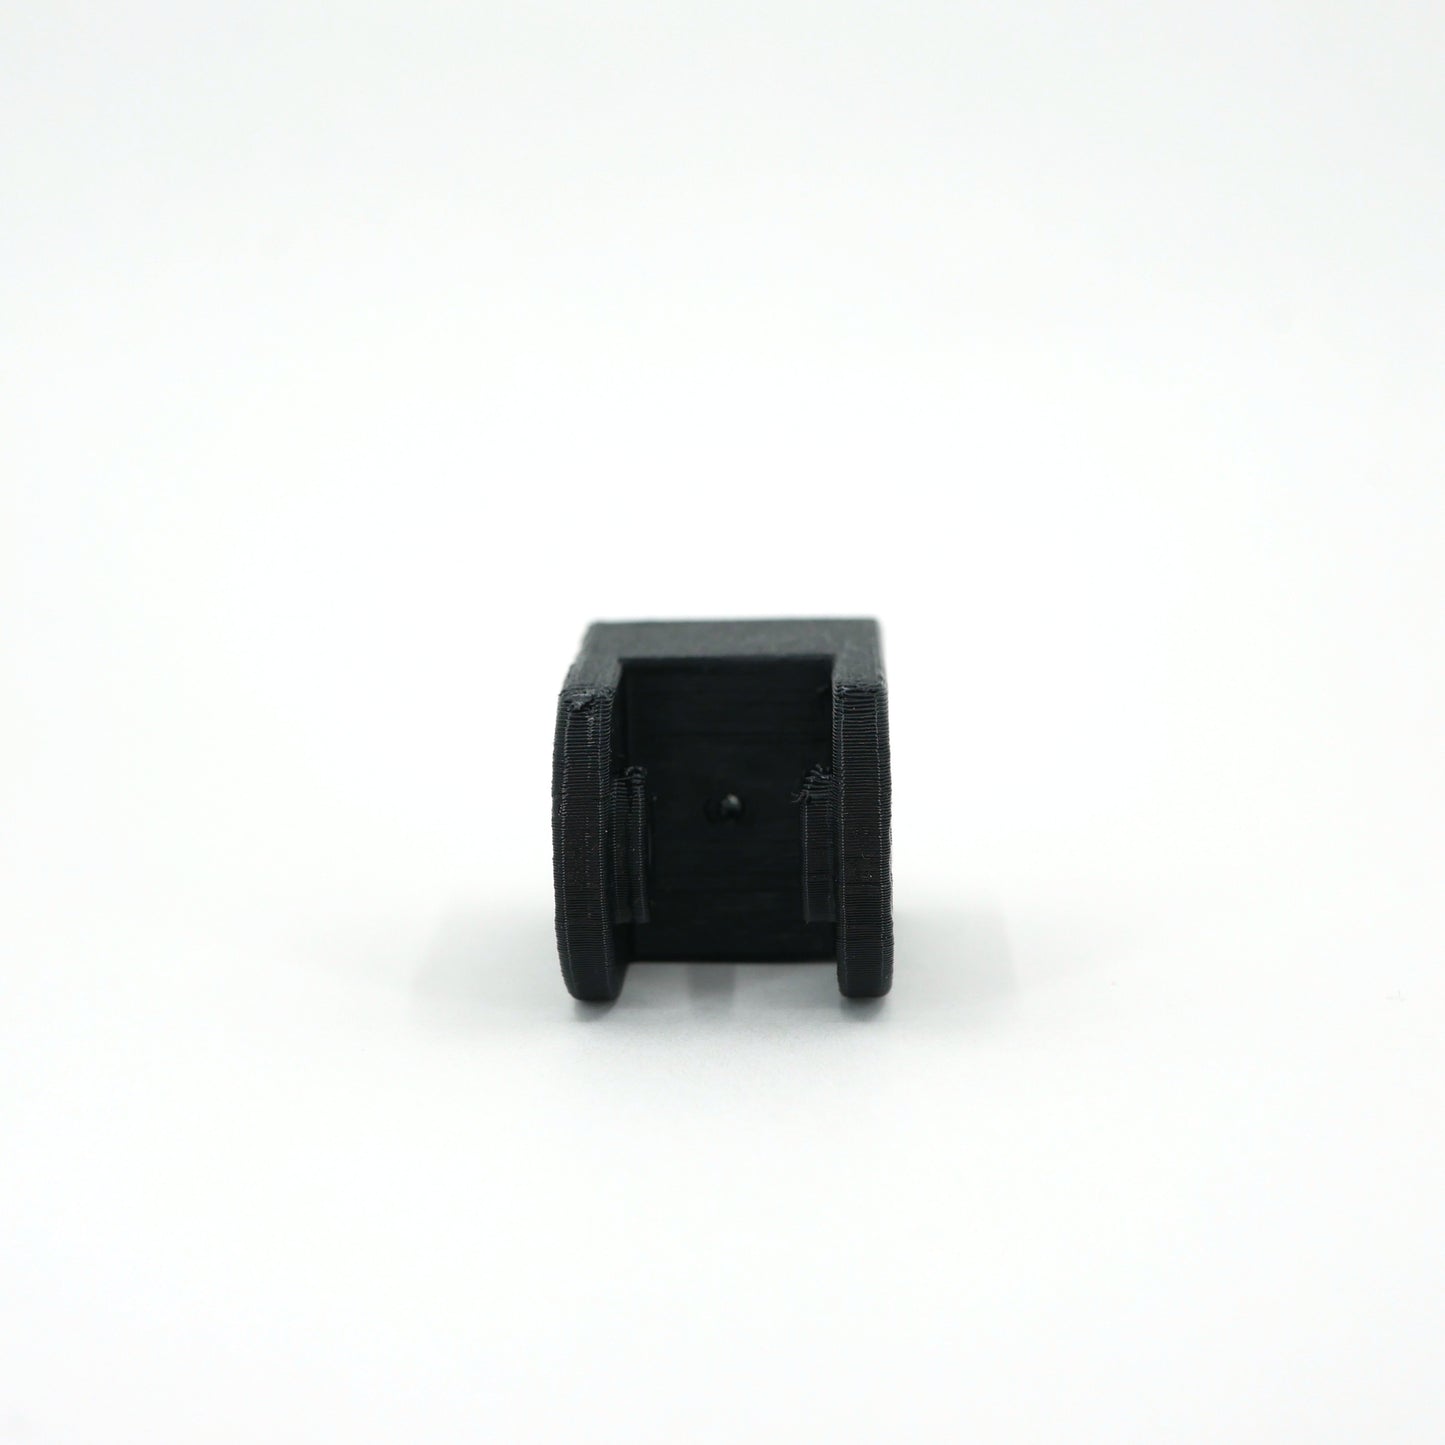 The top of a black HyperX SoloCast microphone mount adapter.